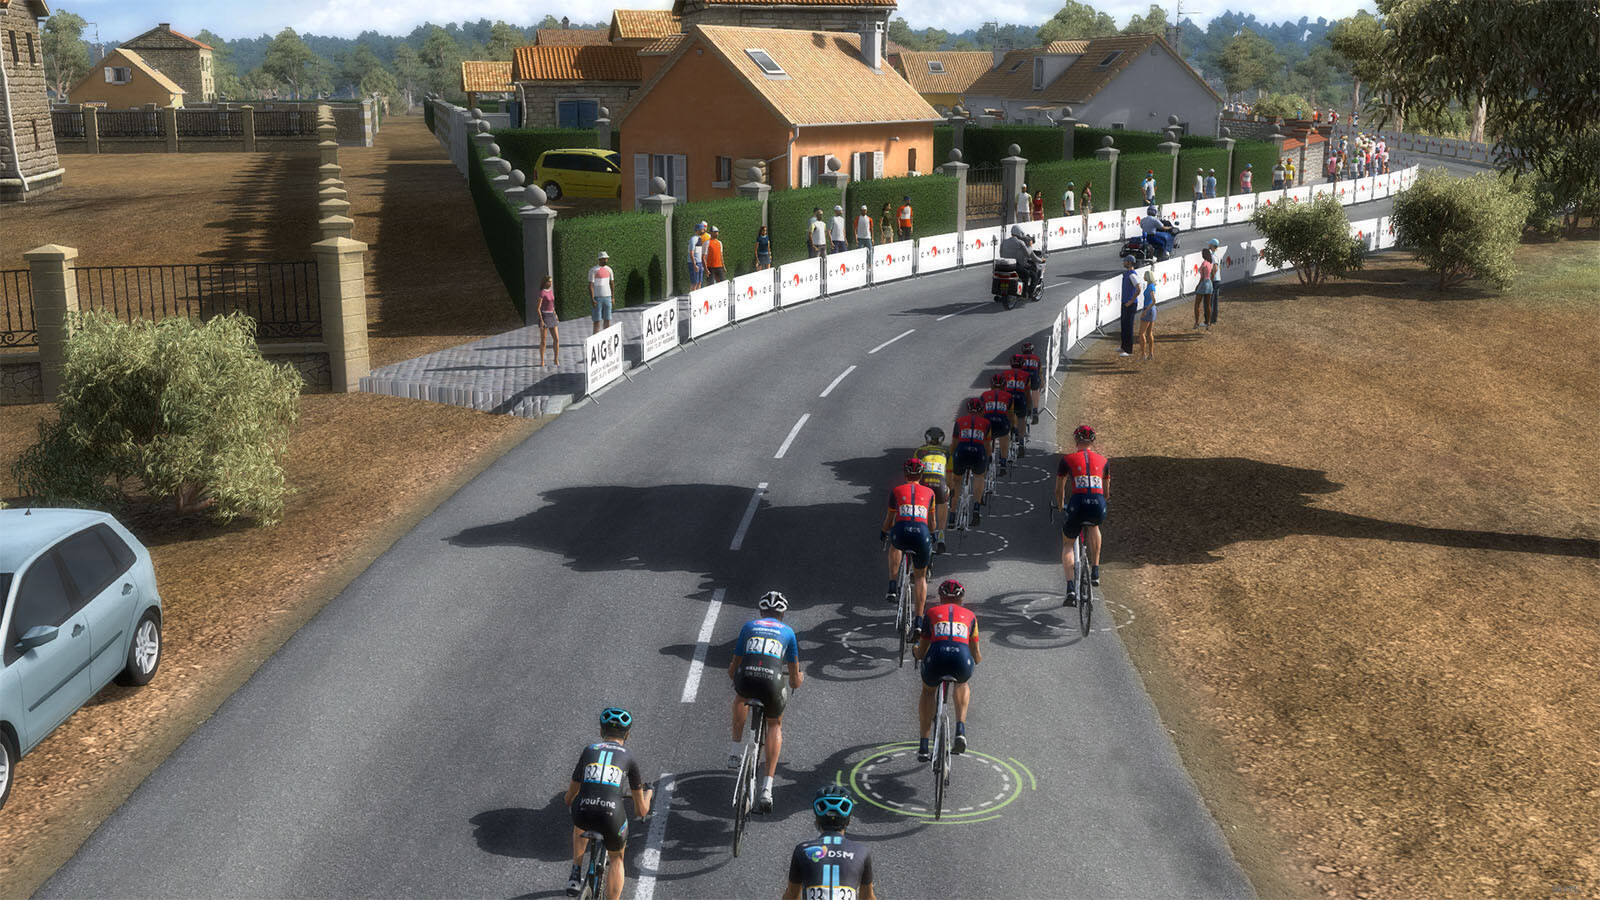 Pro Cycling Manager 2022 (PC) Key cheap - Price of $6.52 for Steam